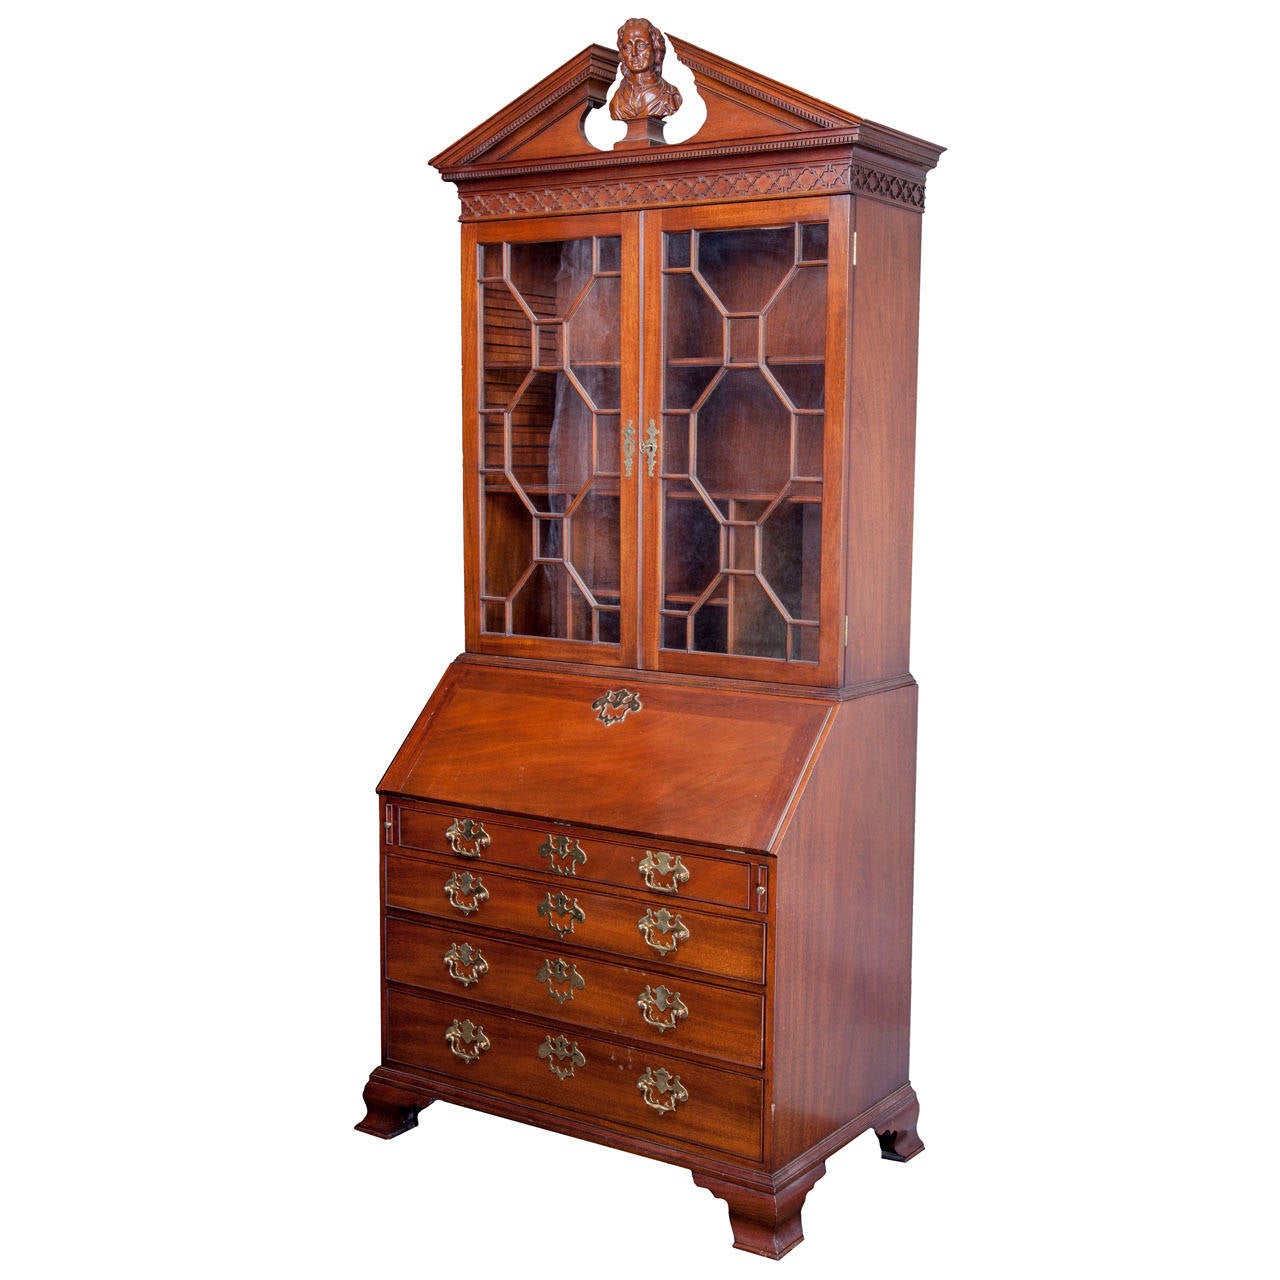 This very rare Kindel reproduction is part of The National for Historic Preservation Collection, The Cliveden desk and bookcase is truly a masterpiece. An outstanding example of the Rococo style, the Cliveden desk and bookcase is English, circa